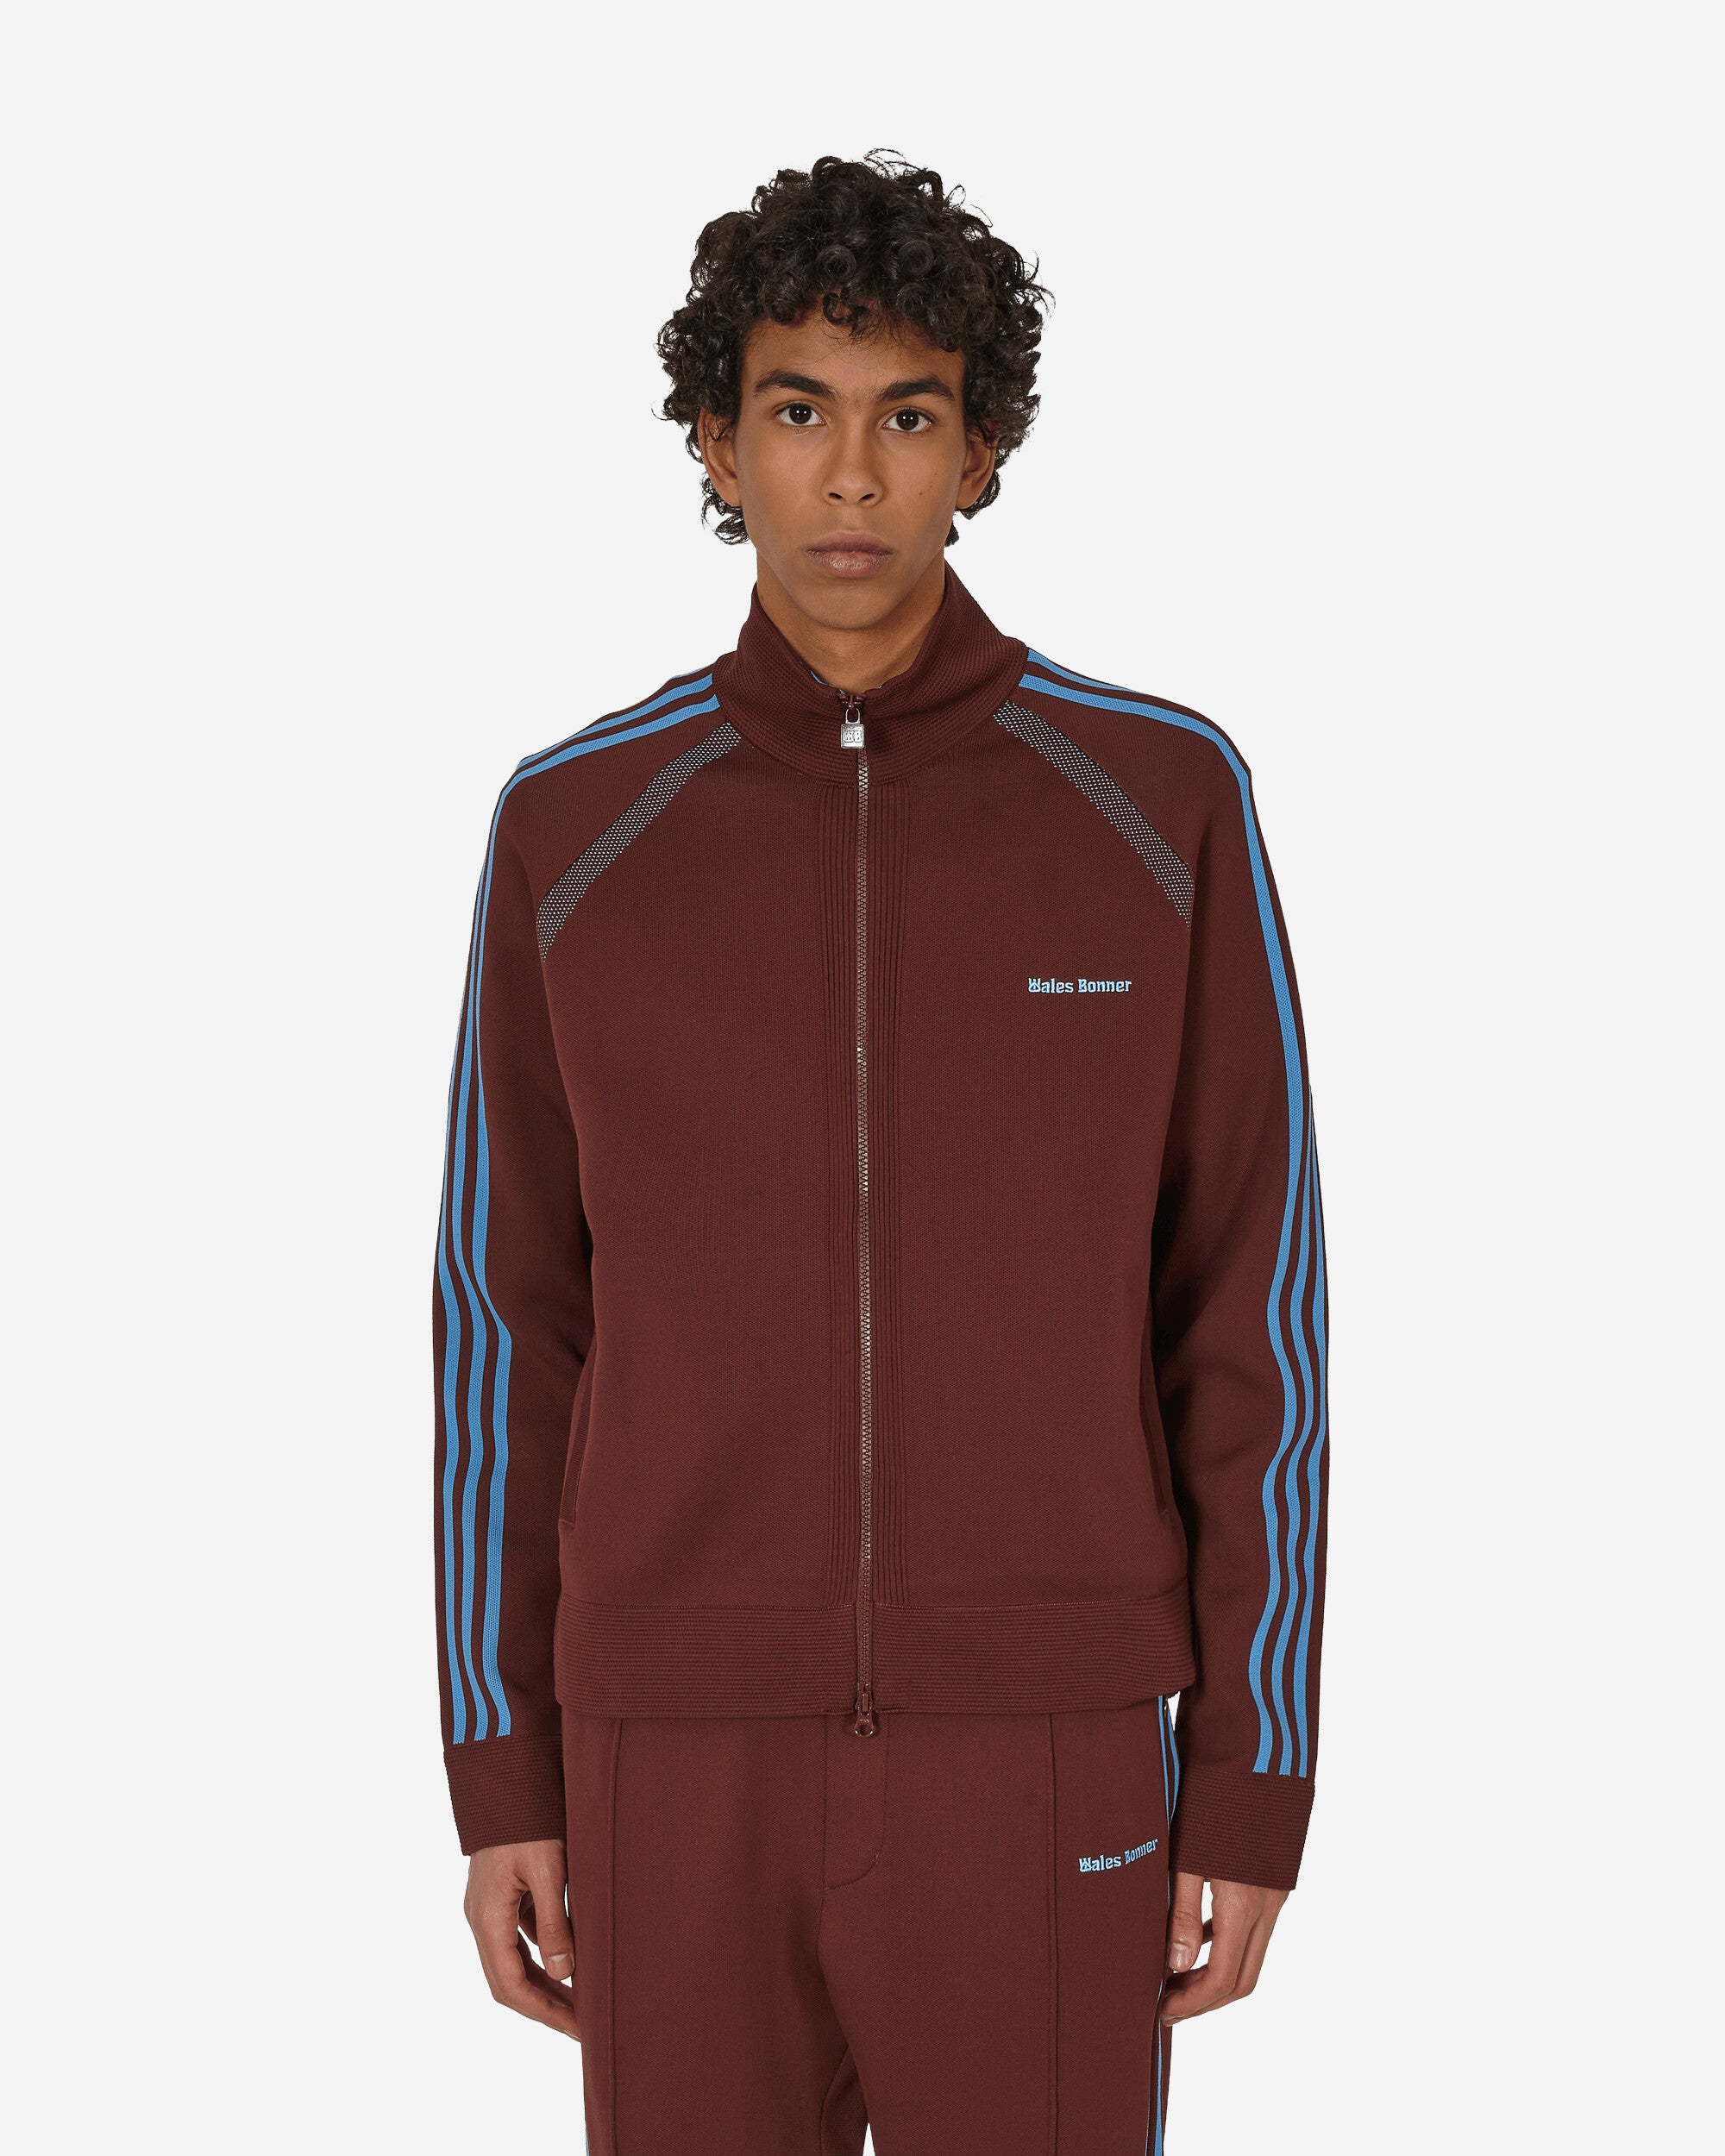 adidas Wales Bonner Statement Knit Track Top Mystery Brown